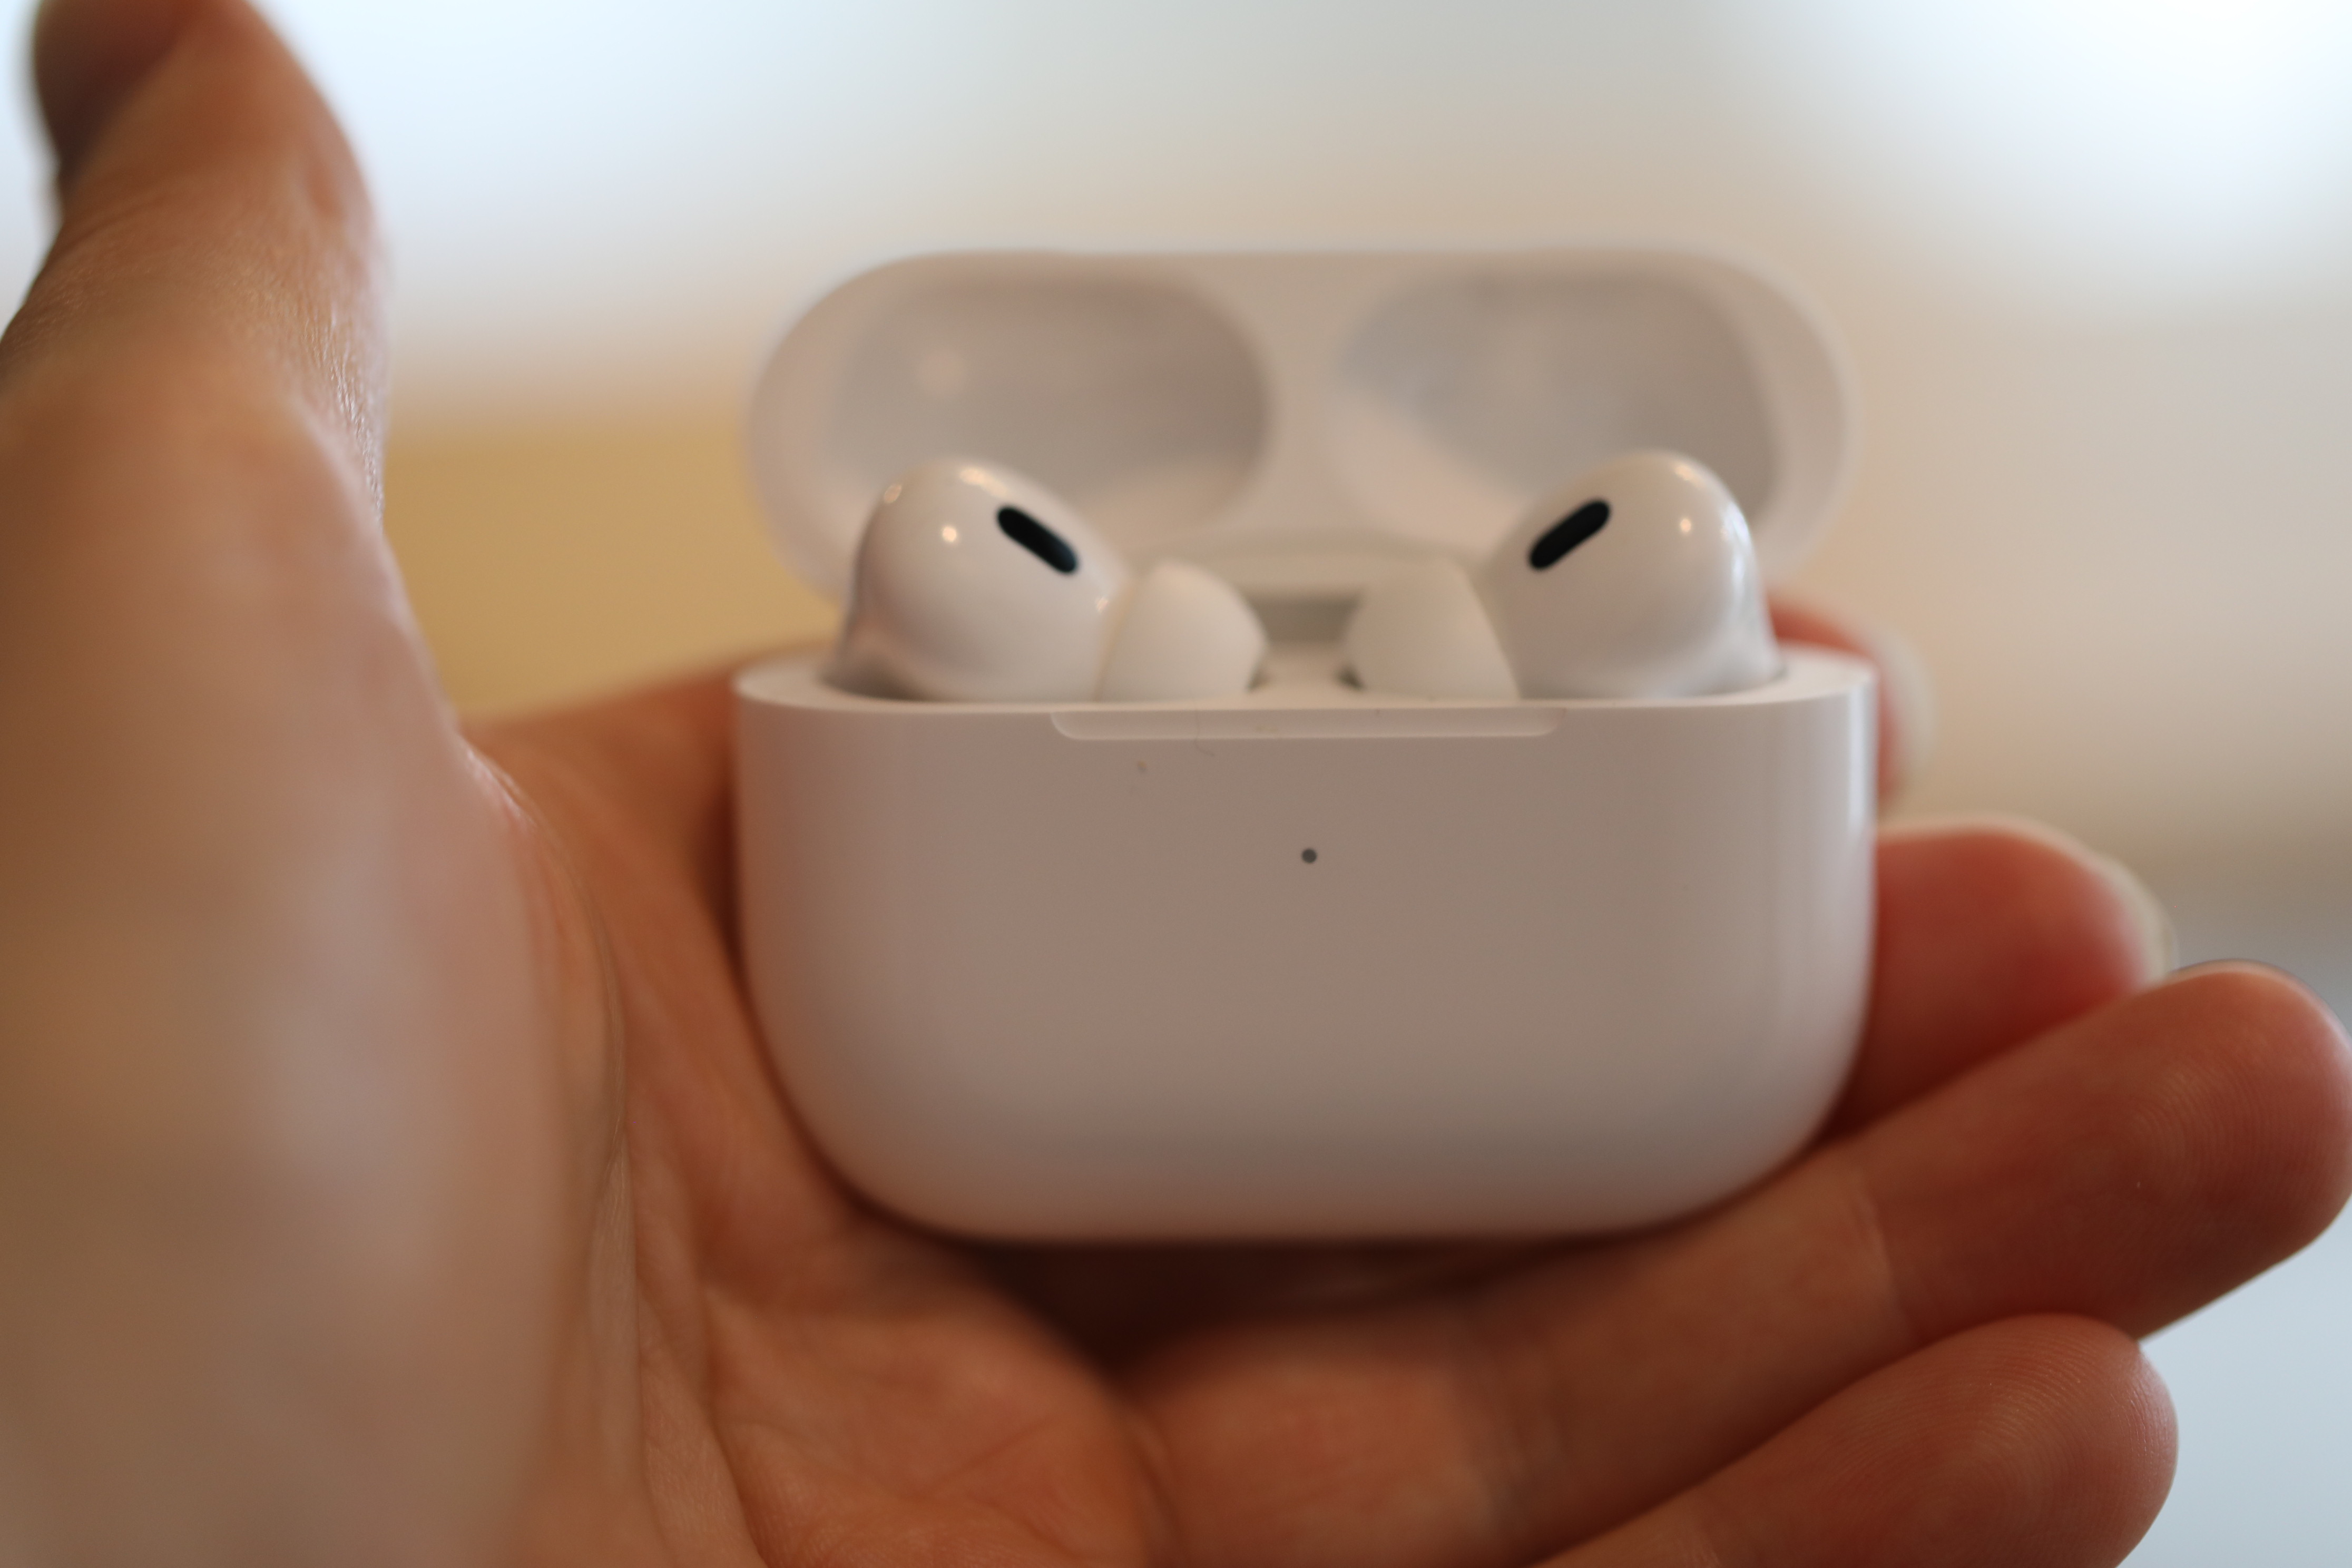 AirPods Pro (2nd Gen) review: Welcome updates to Apple's best buds